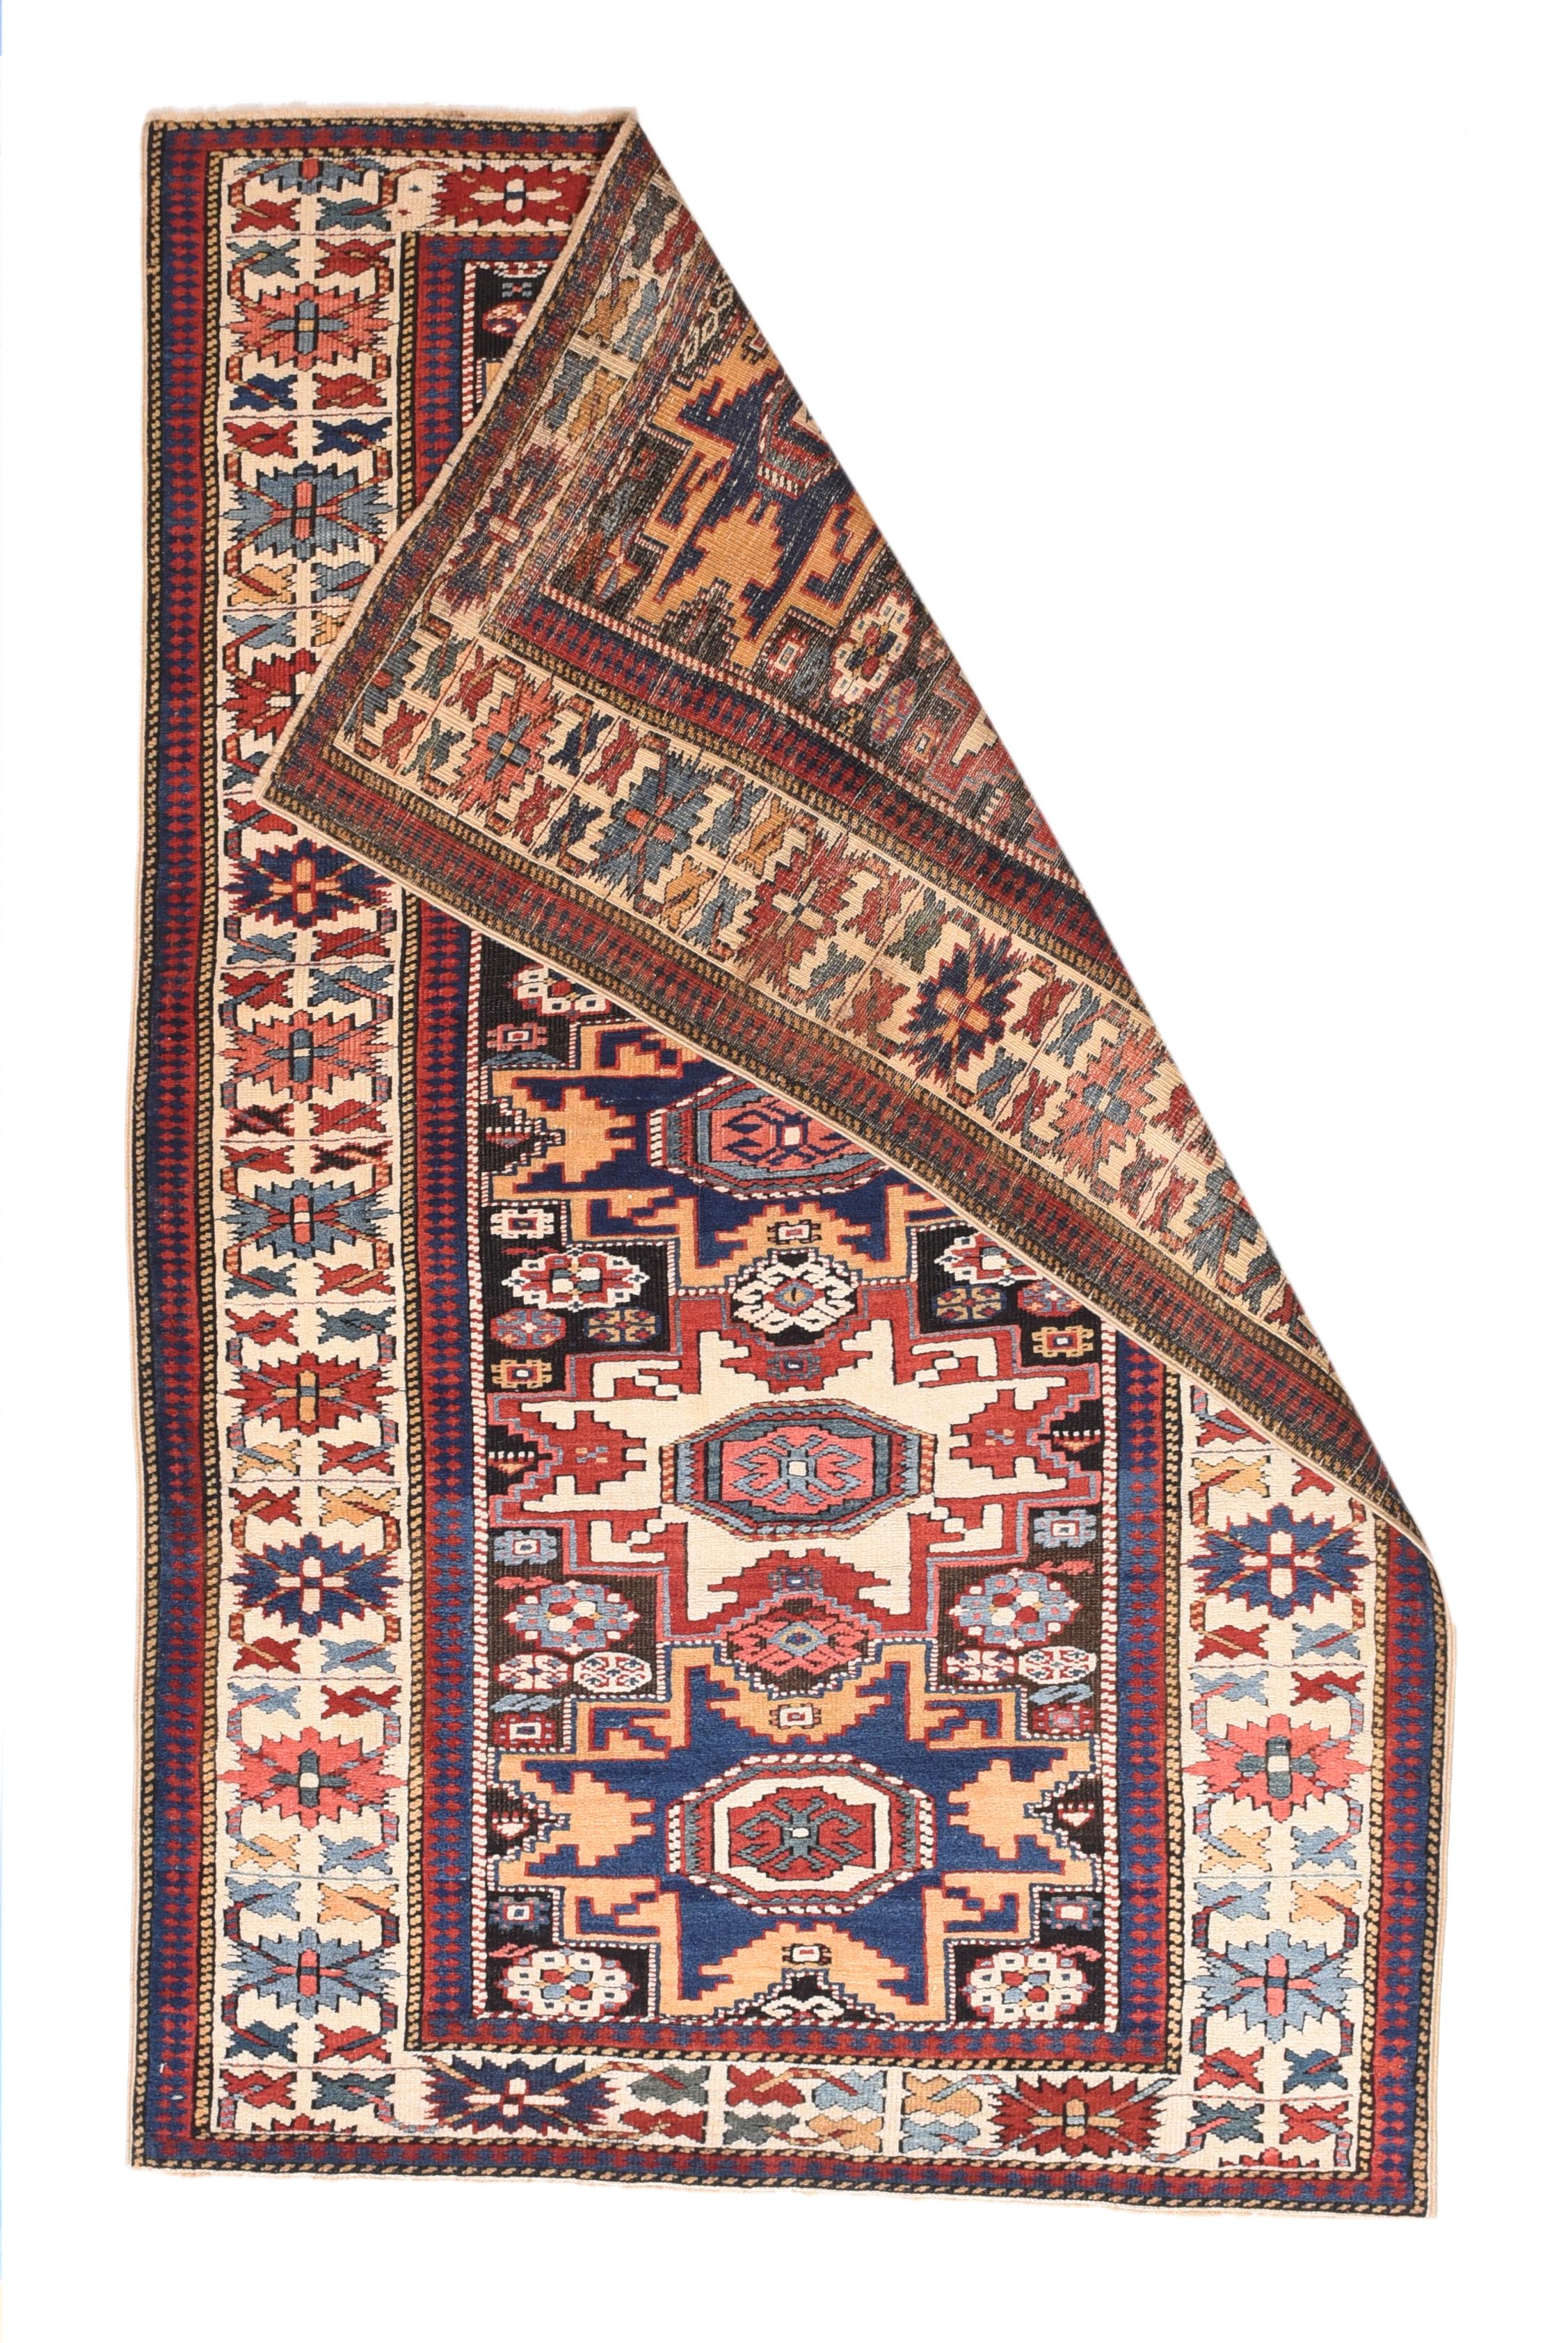 Other Fine Antique Kuba Russian Rug, Hand Knotted, circa 1890